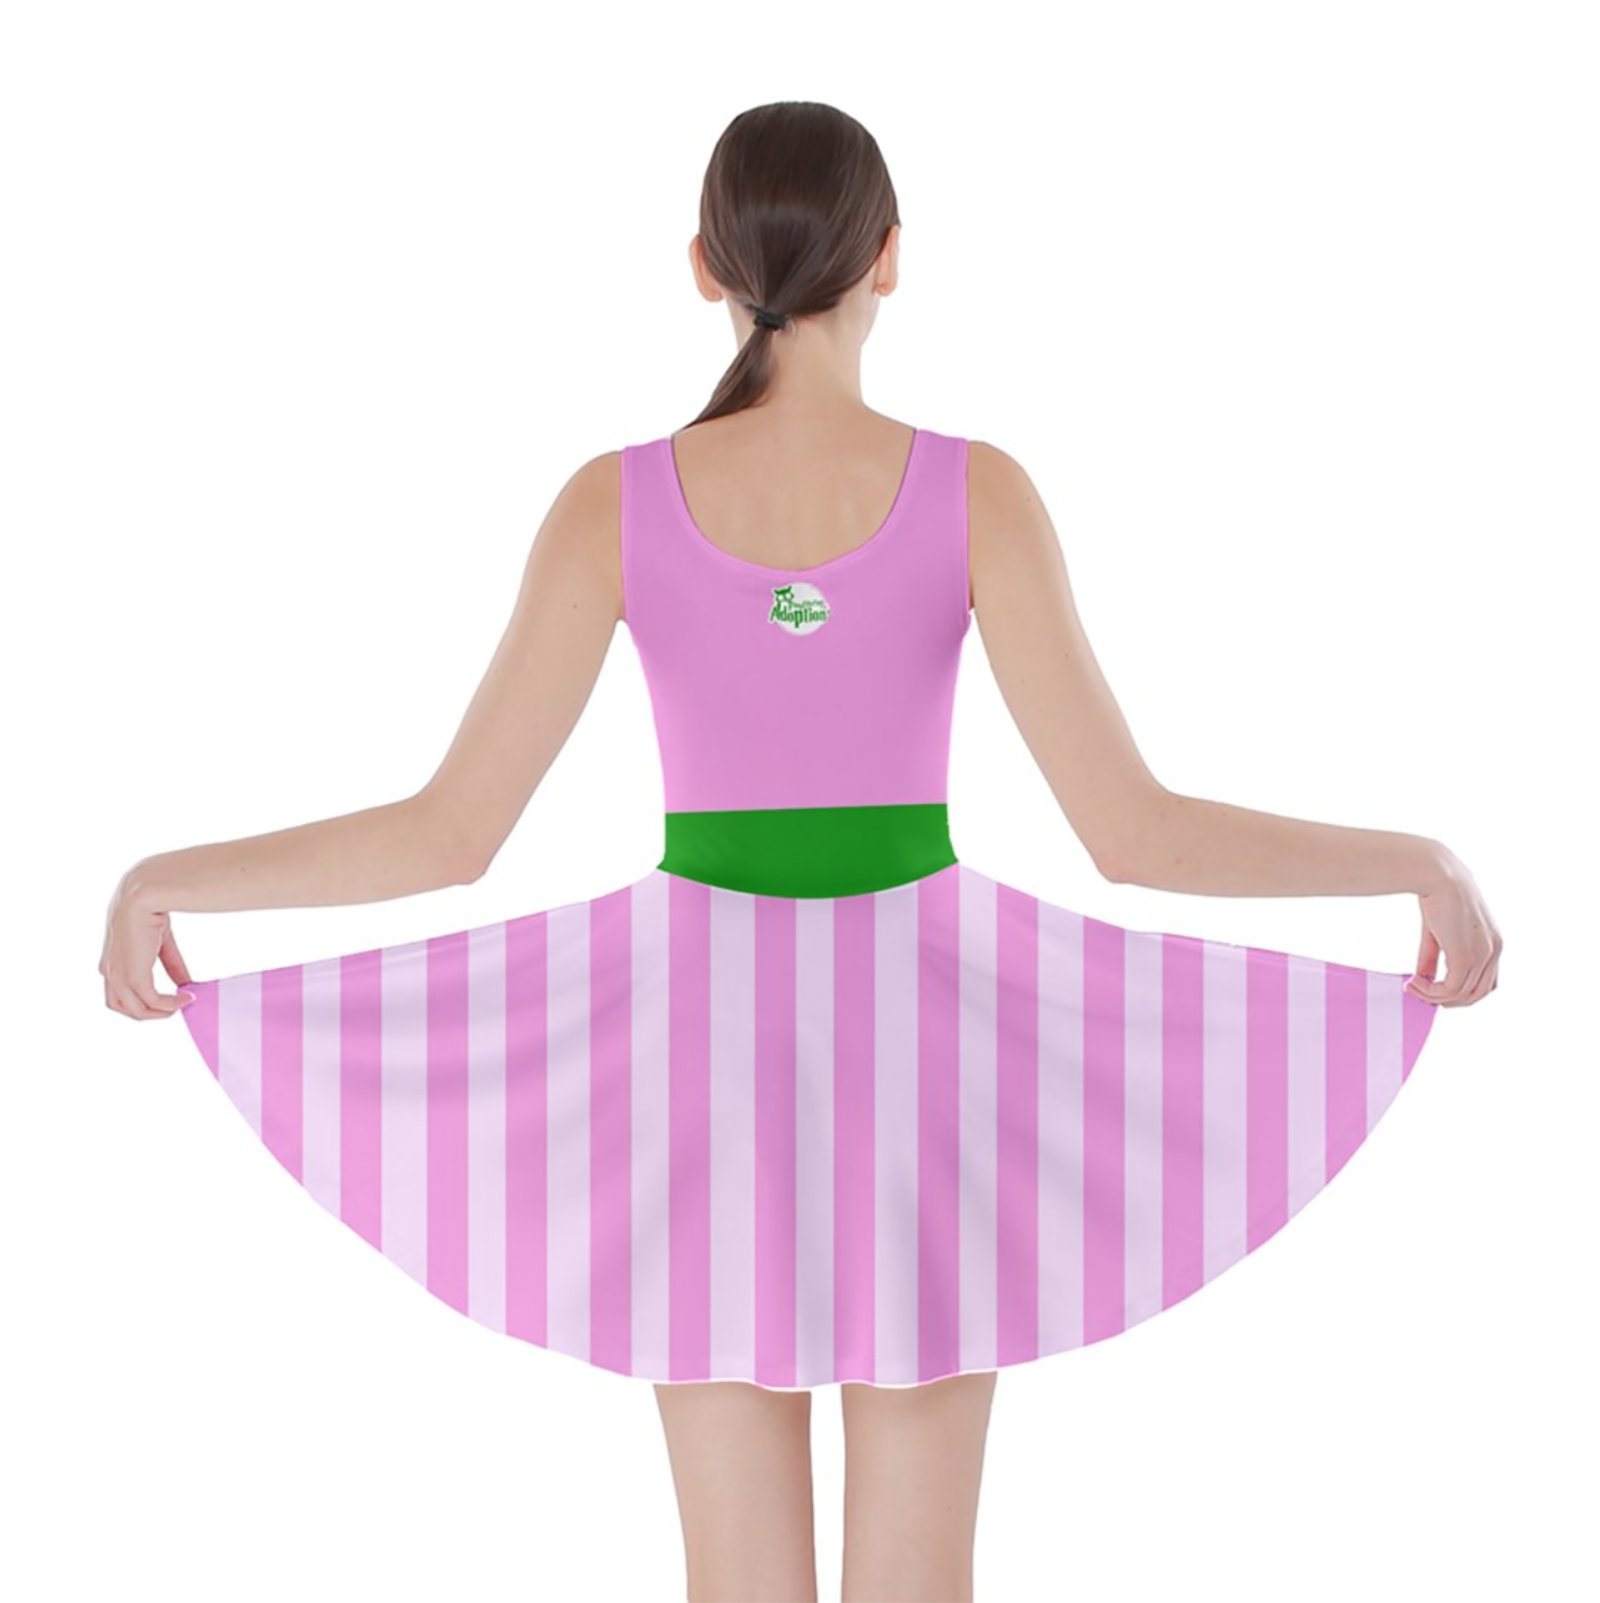 Candy Store Owl Skater Dress (pink striped pattern)